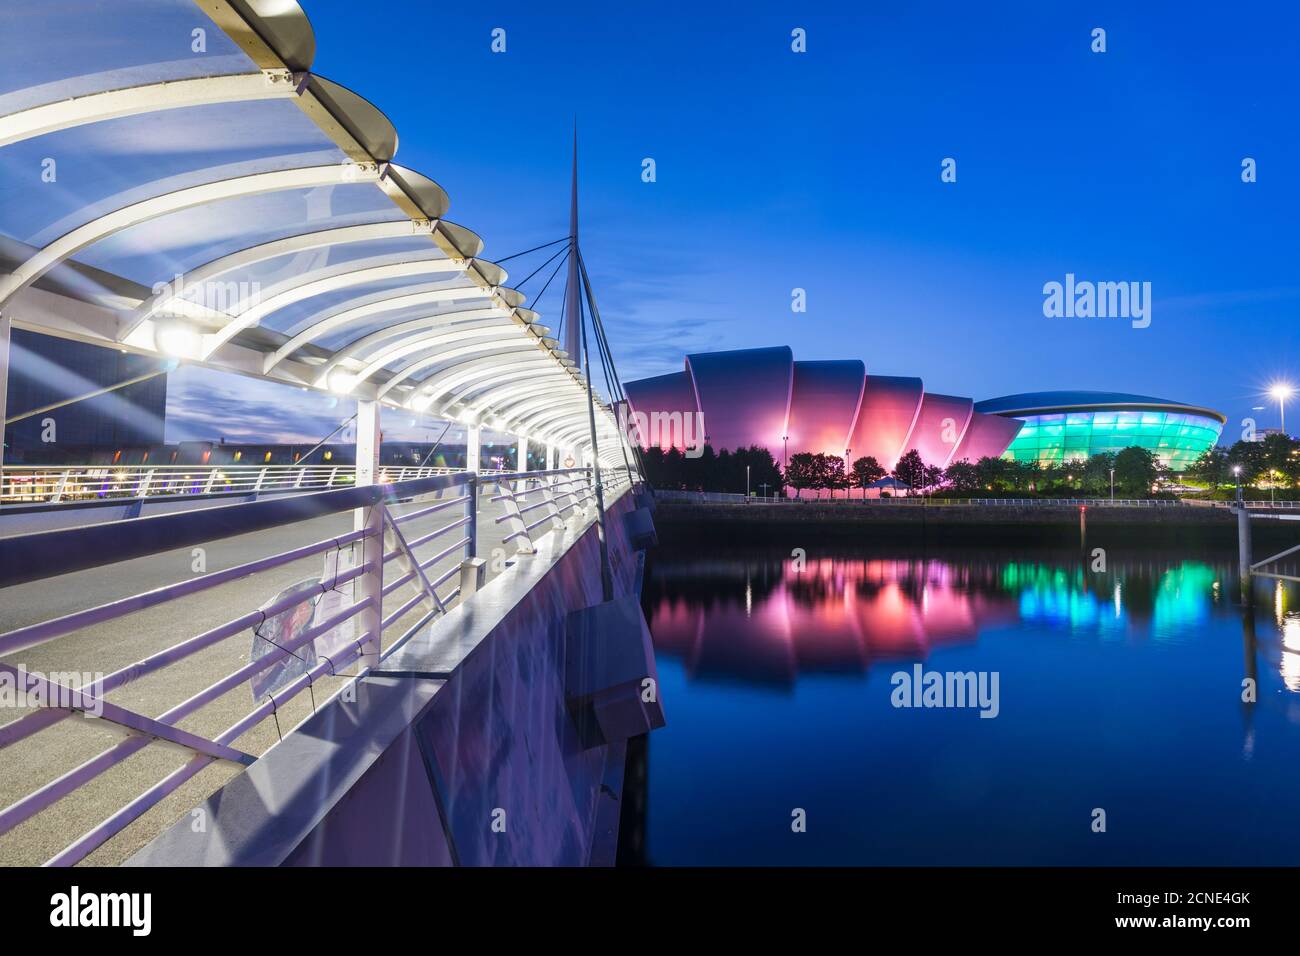 Bell's Bridge, The Armadillo, The SSE Hydro and the River Clyde, Pacific Quay, Glasgow, Écosse, Royaume-Uni, Europe Banque D'Images